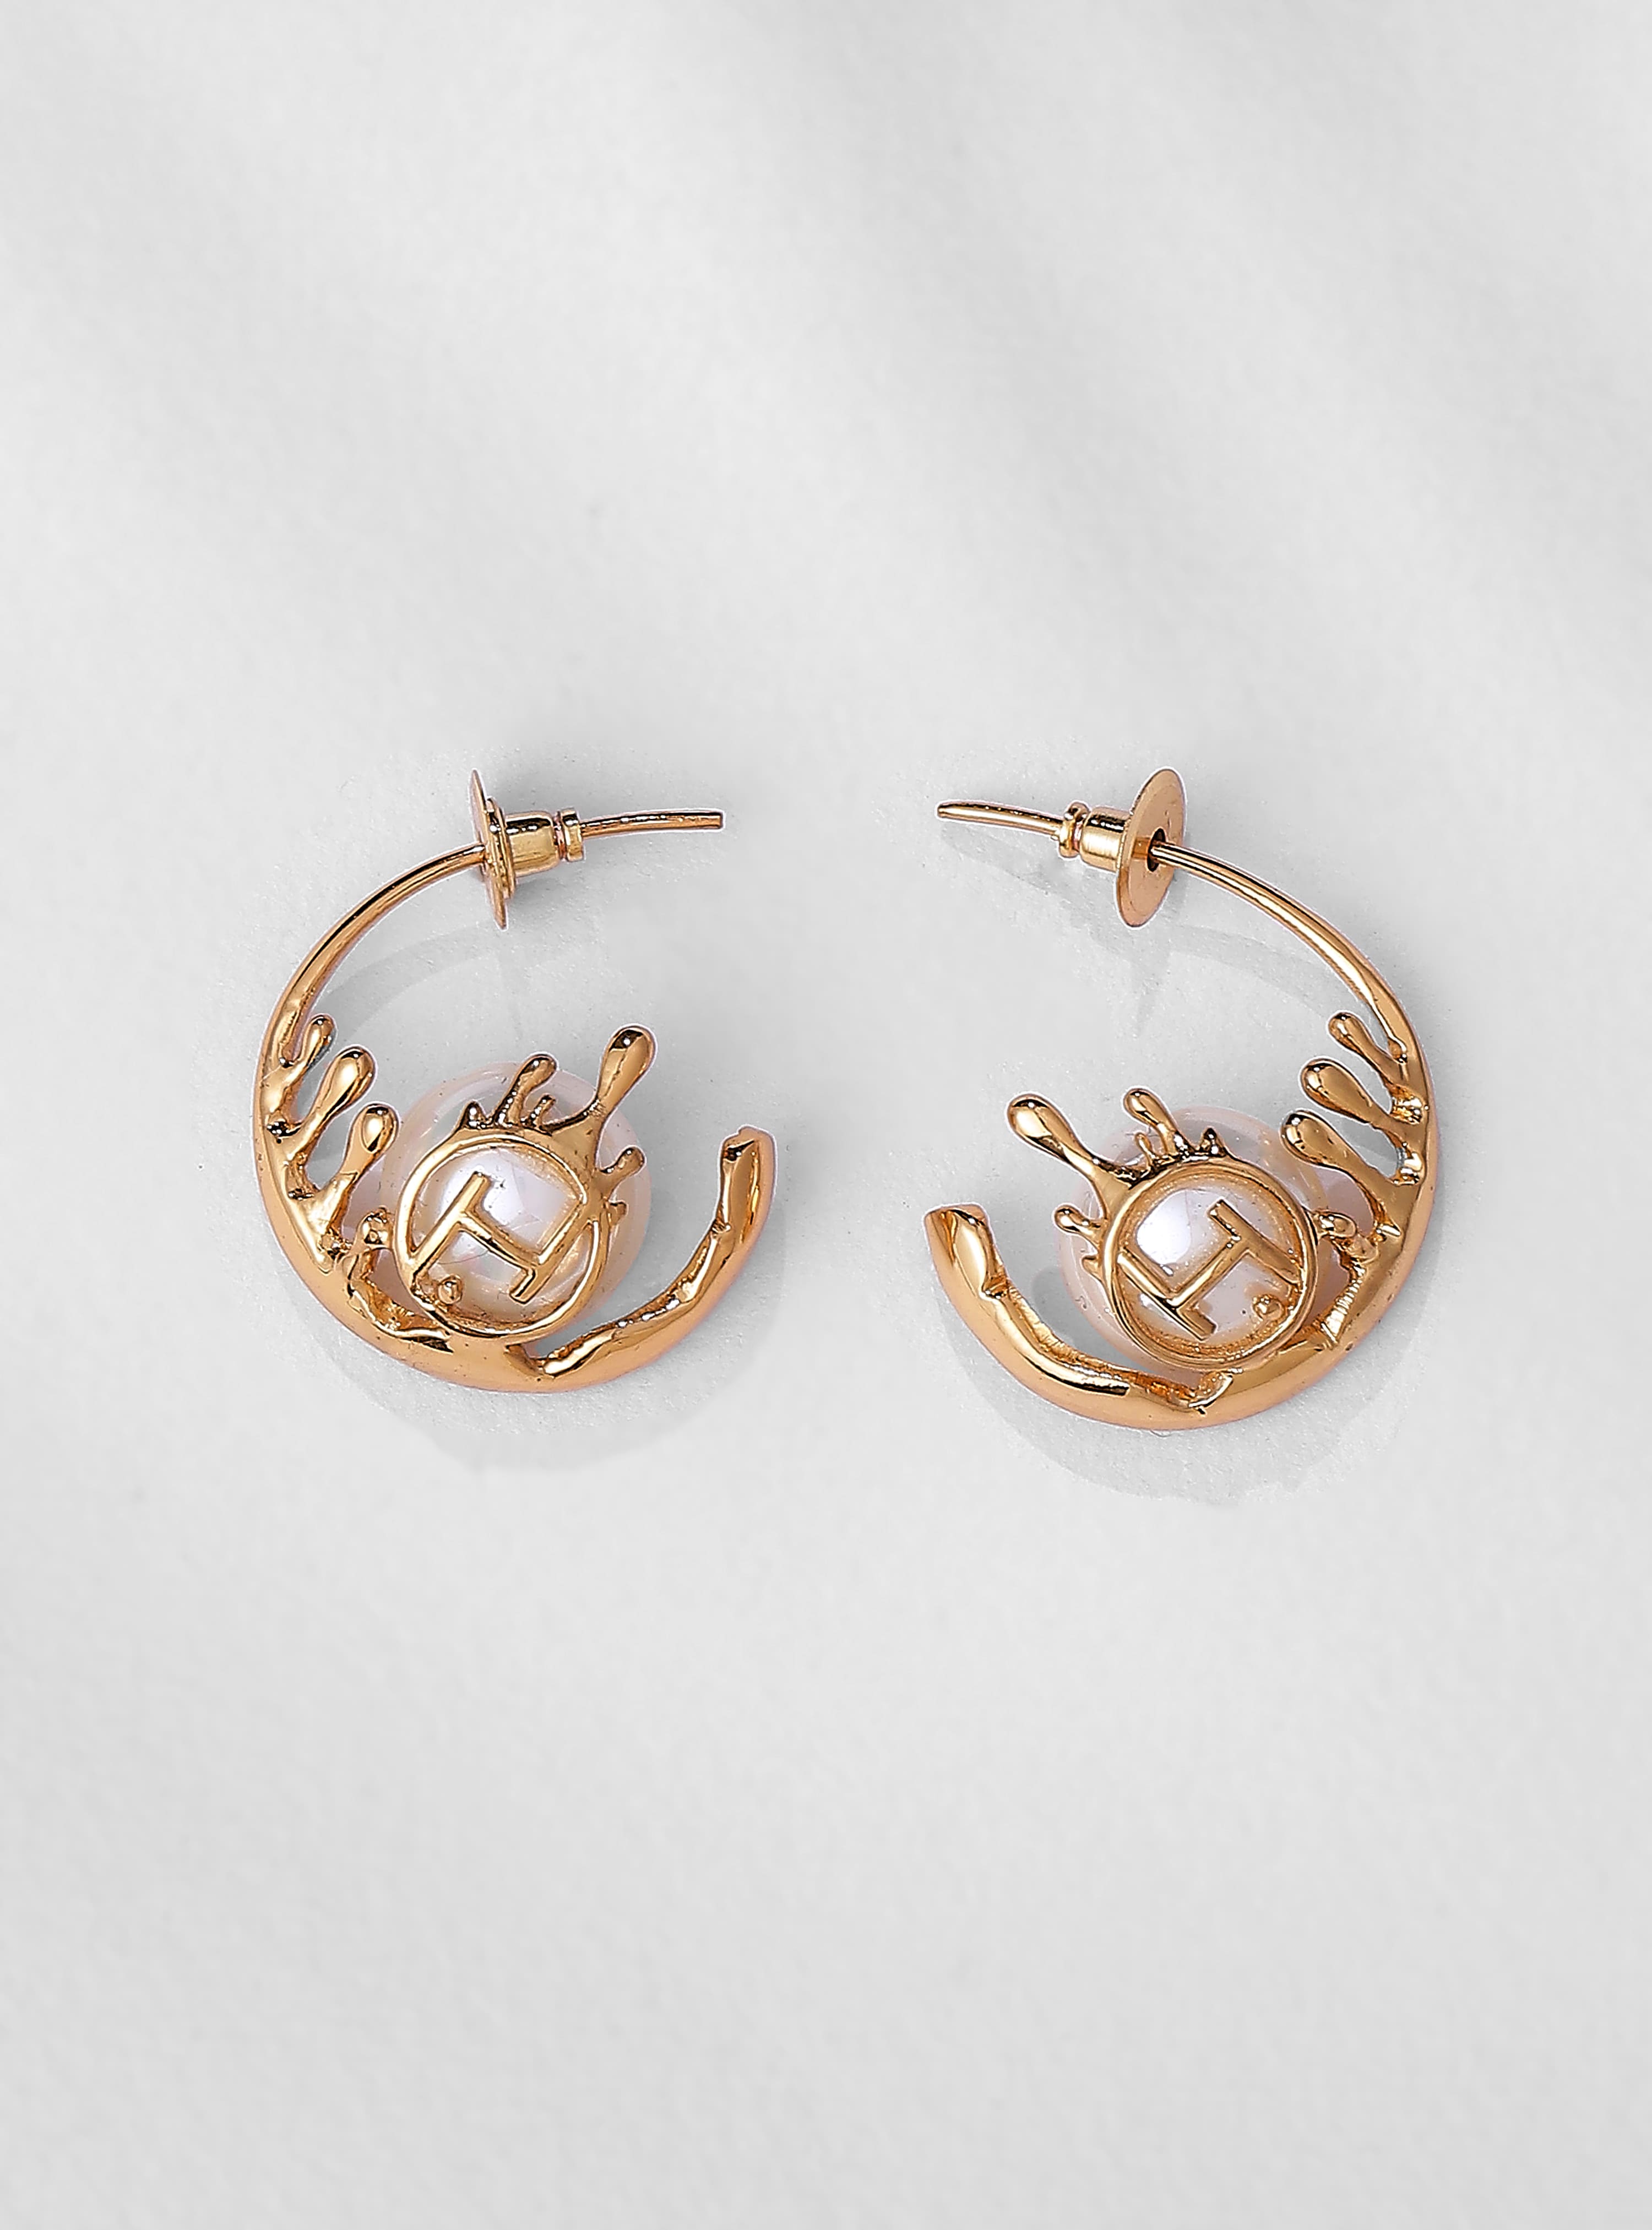 Top 10 on trend Gold Hoops Earrings | Small 9ct gold hoops | Large gold hoops  earrings Tagged 